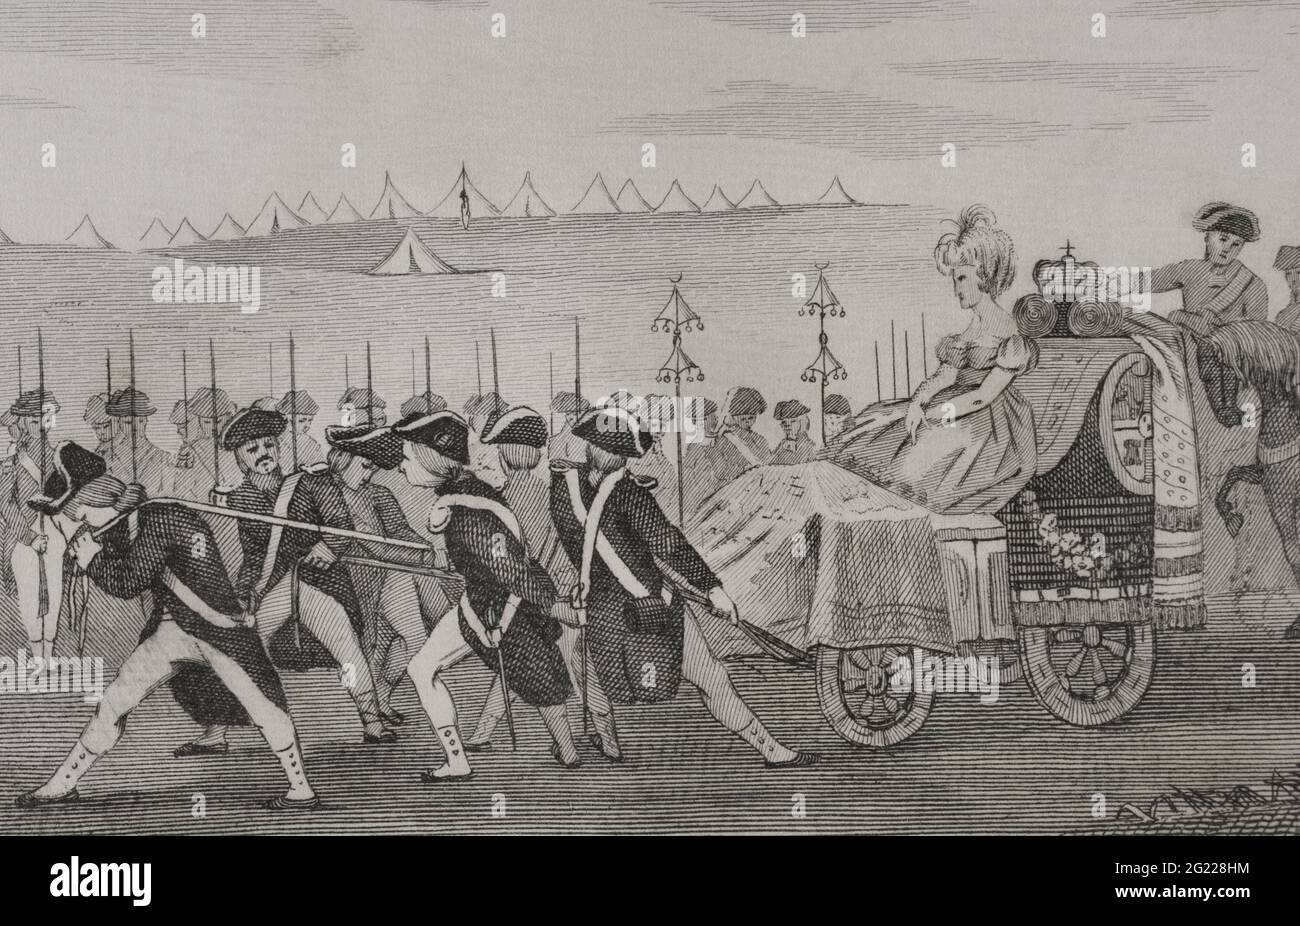 Reign of Charles IV of Spain. Review of Badajoz (1801). It took place in  the Campo de Santa Engracia, near Badajoz. Manuel Godoy, Prince of Peace,  appeared leading the army driving a